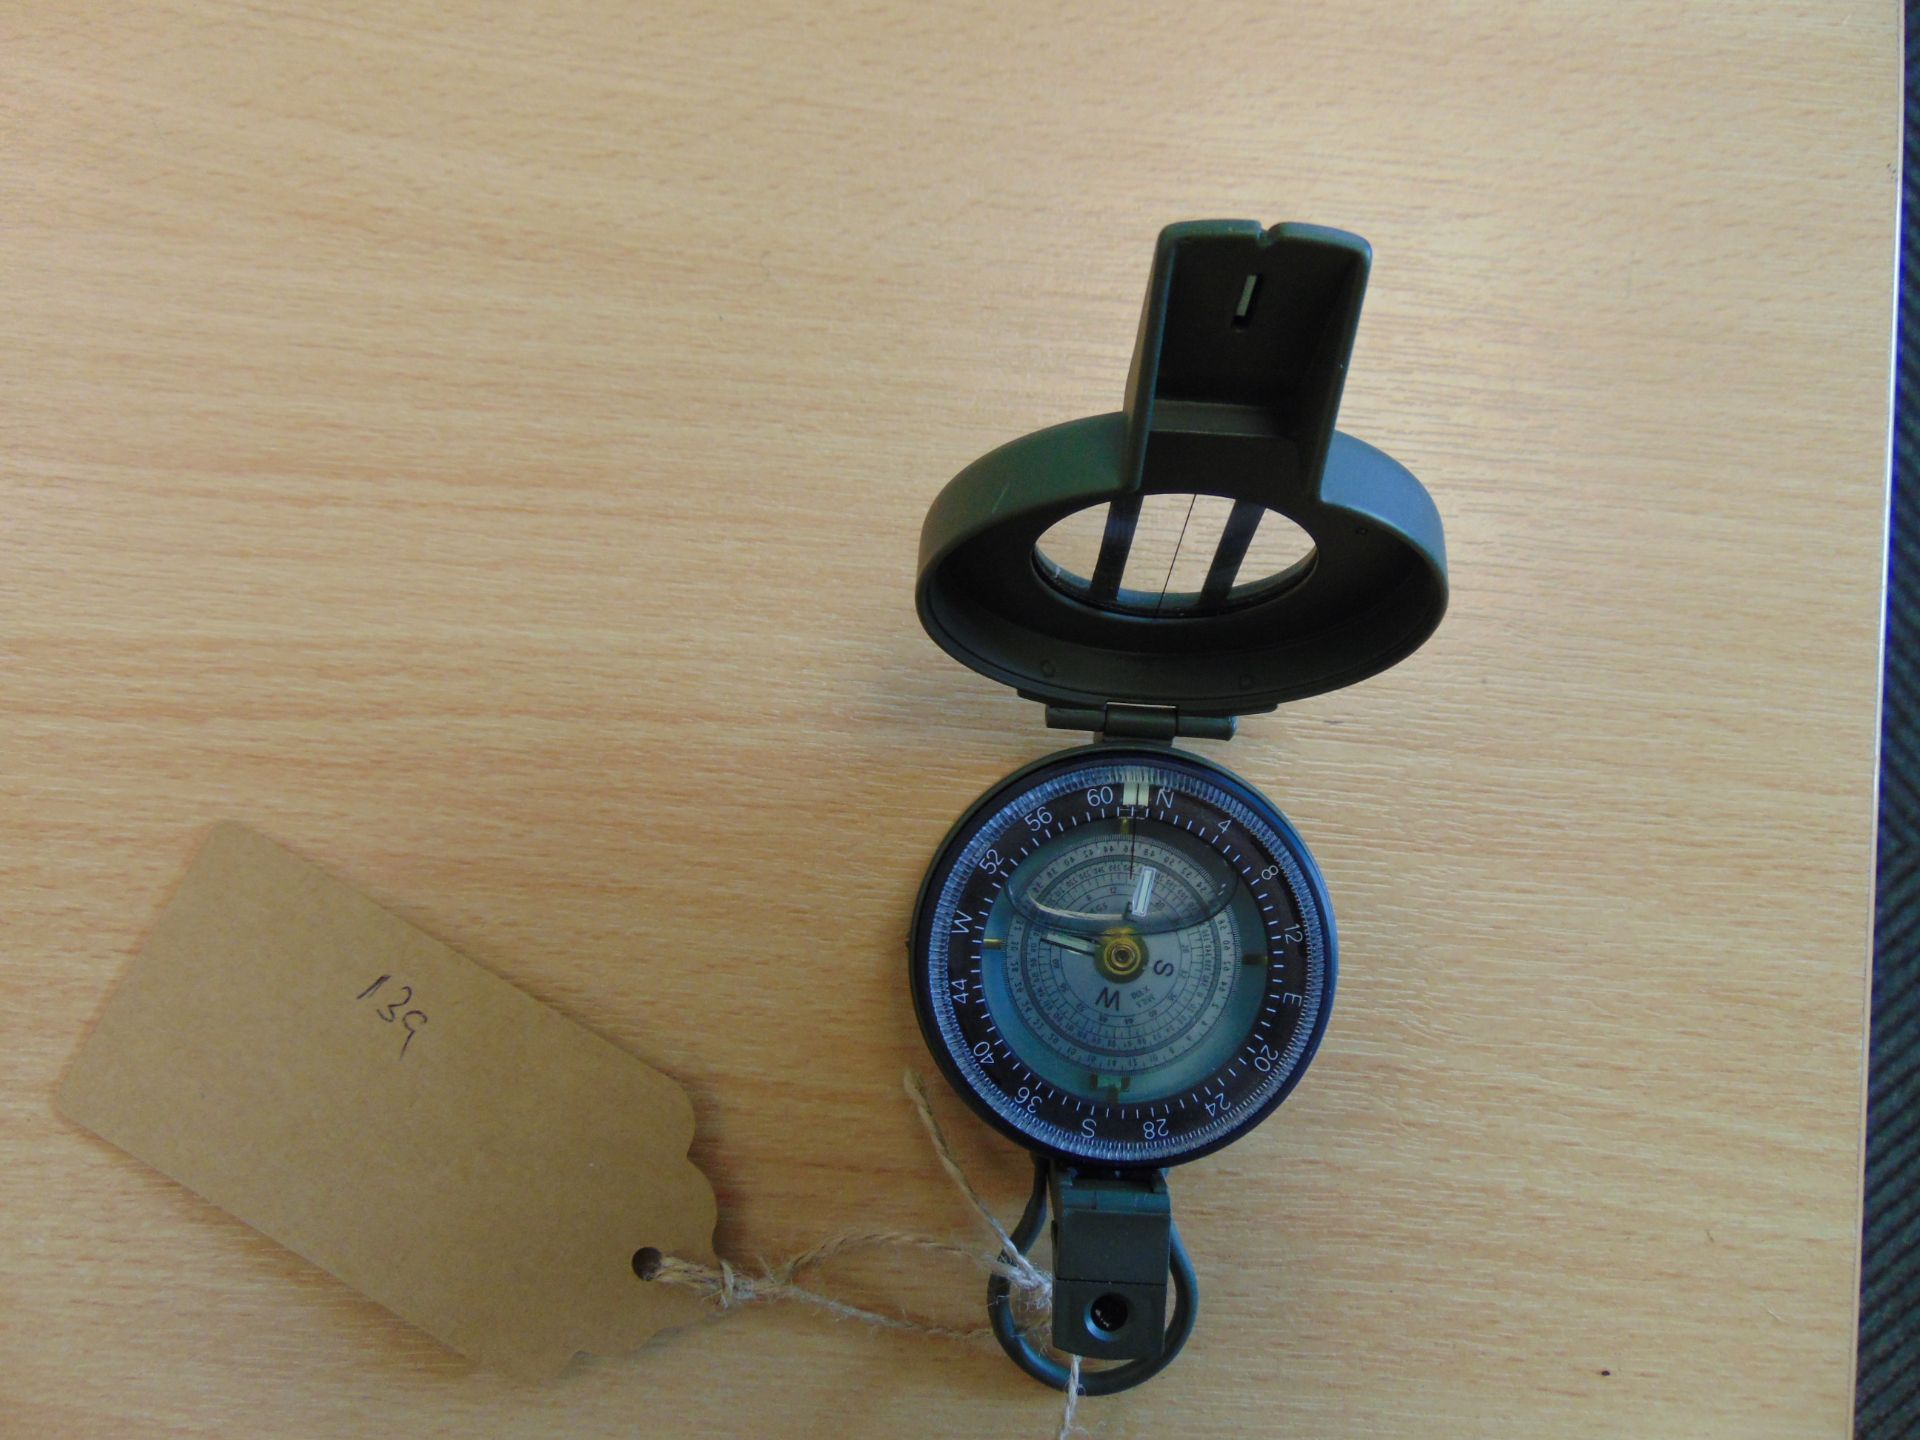 Francis Barker British Army M88 Prismatic Compass in Mils - Image 2 of 3